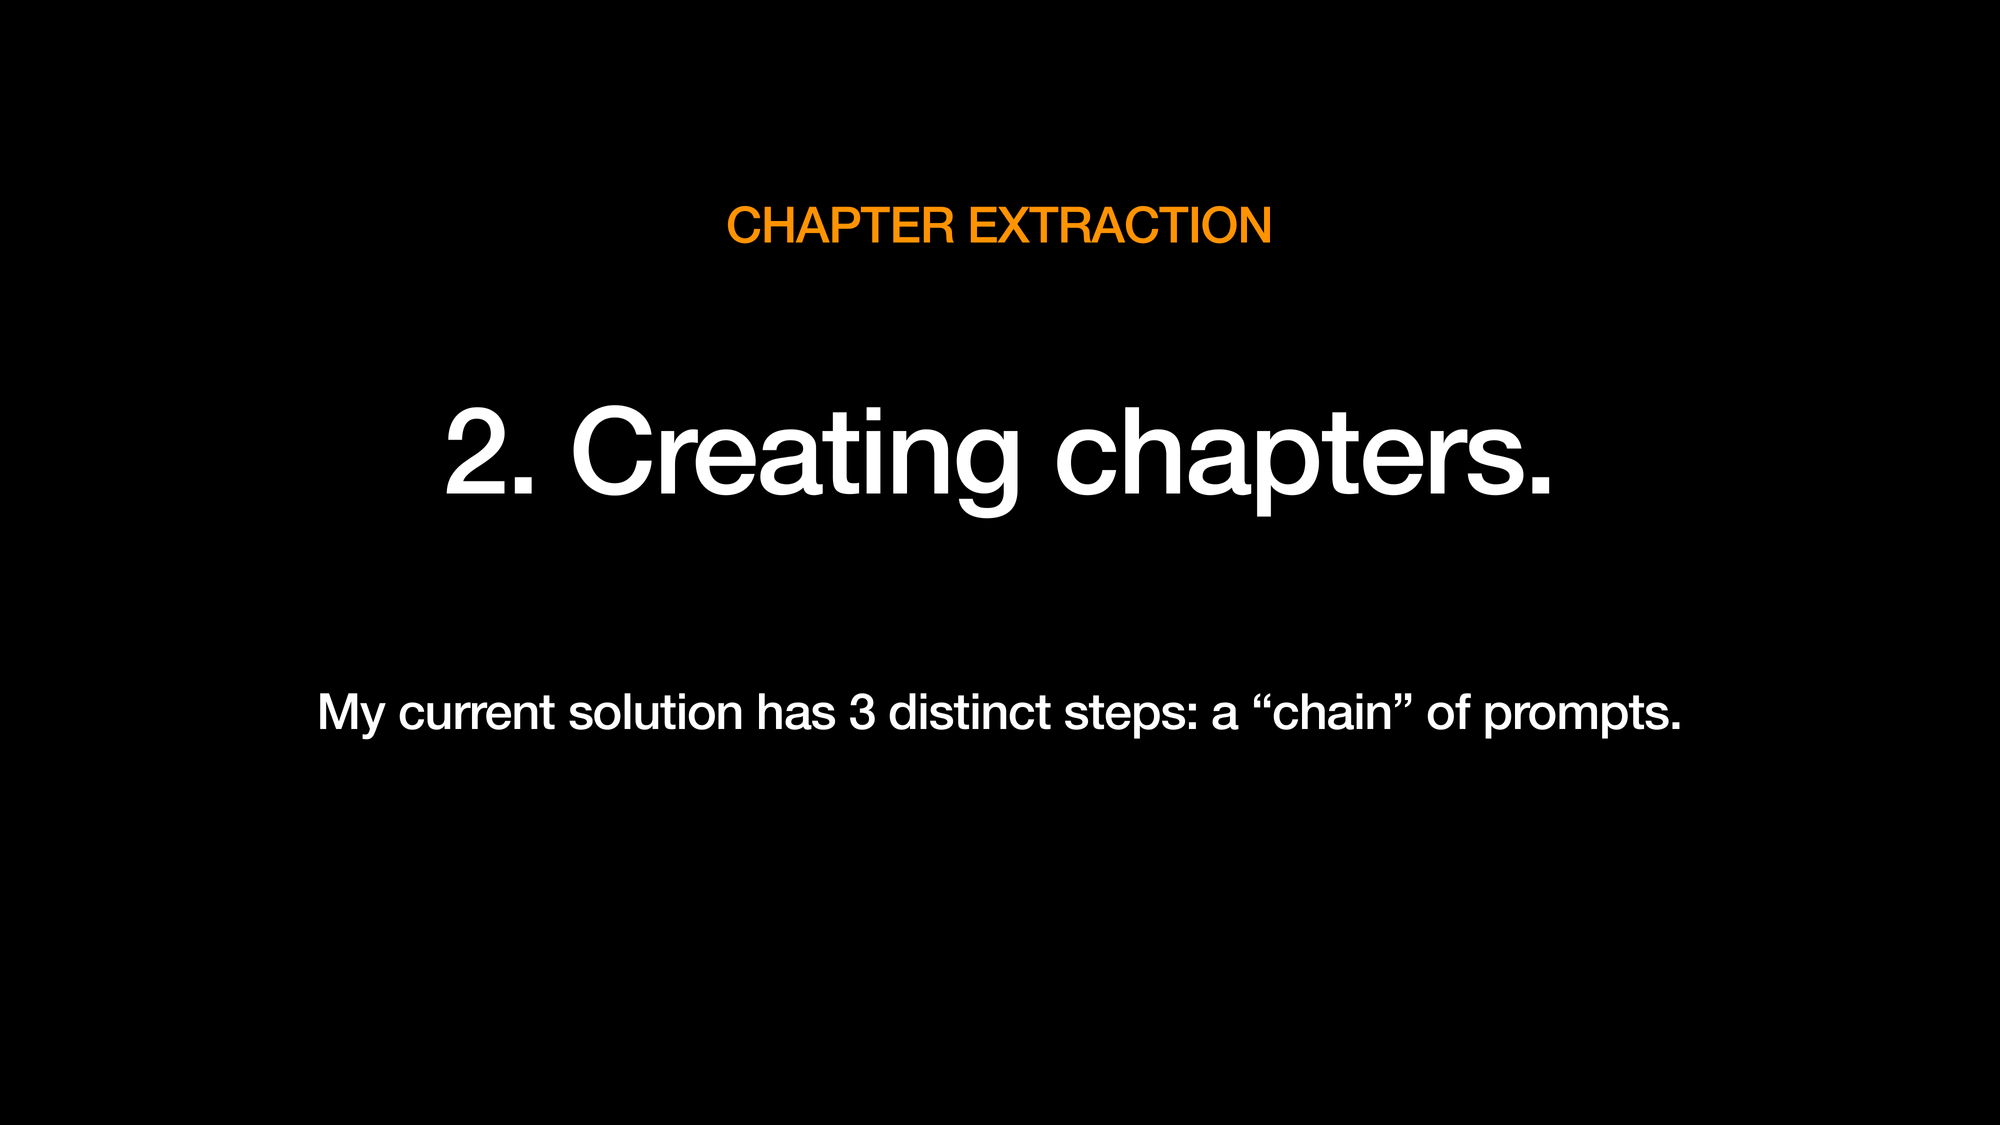 CHAPTER EXTRACTION 2. Creating chapters. My current solution has 3 distinct steps: a “chain” of prompts.